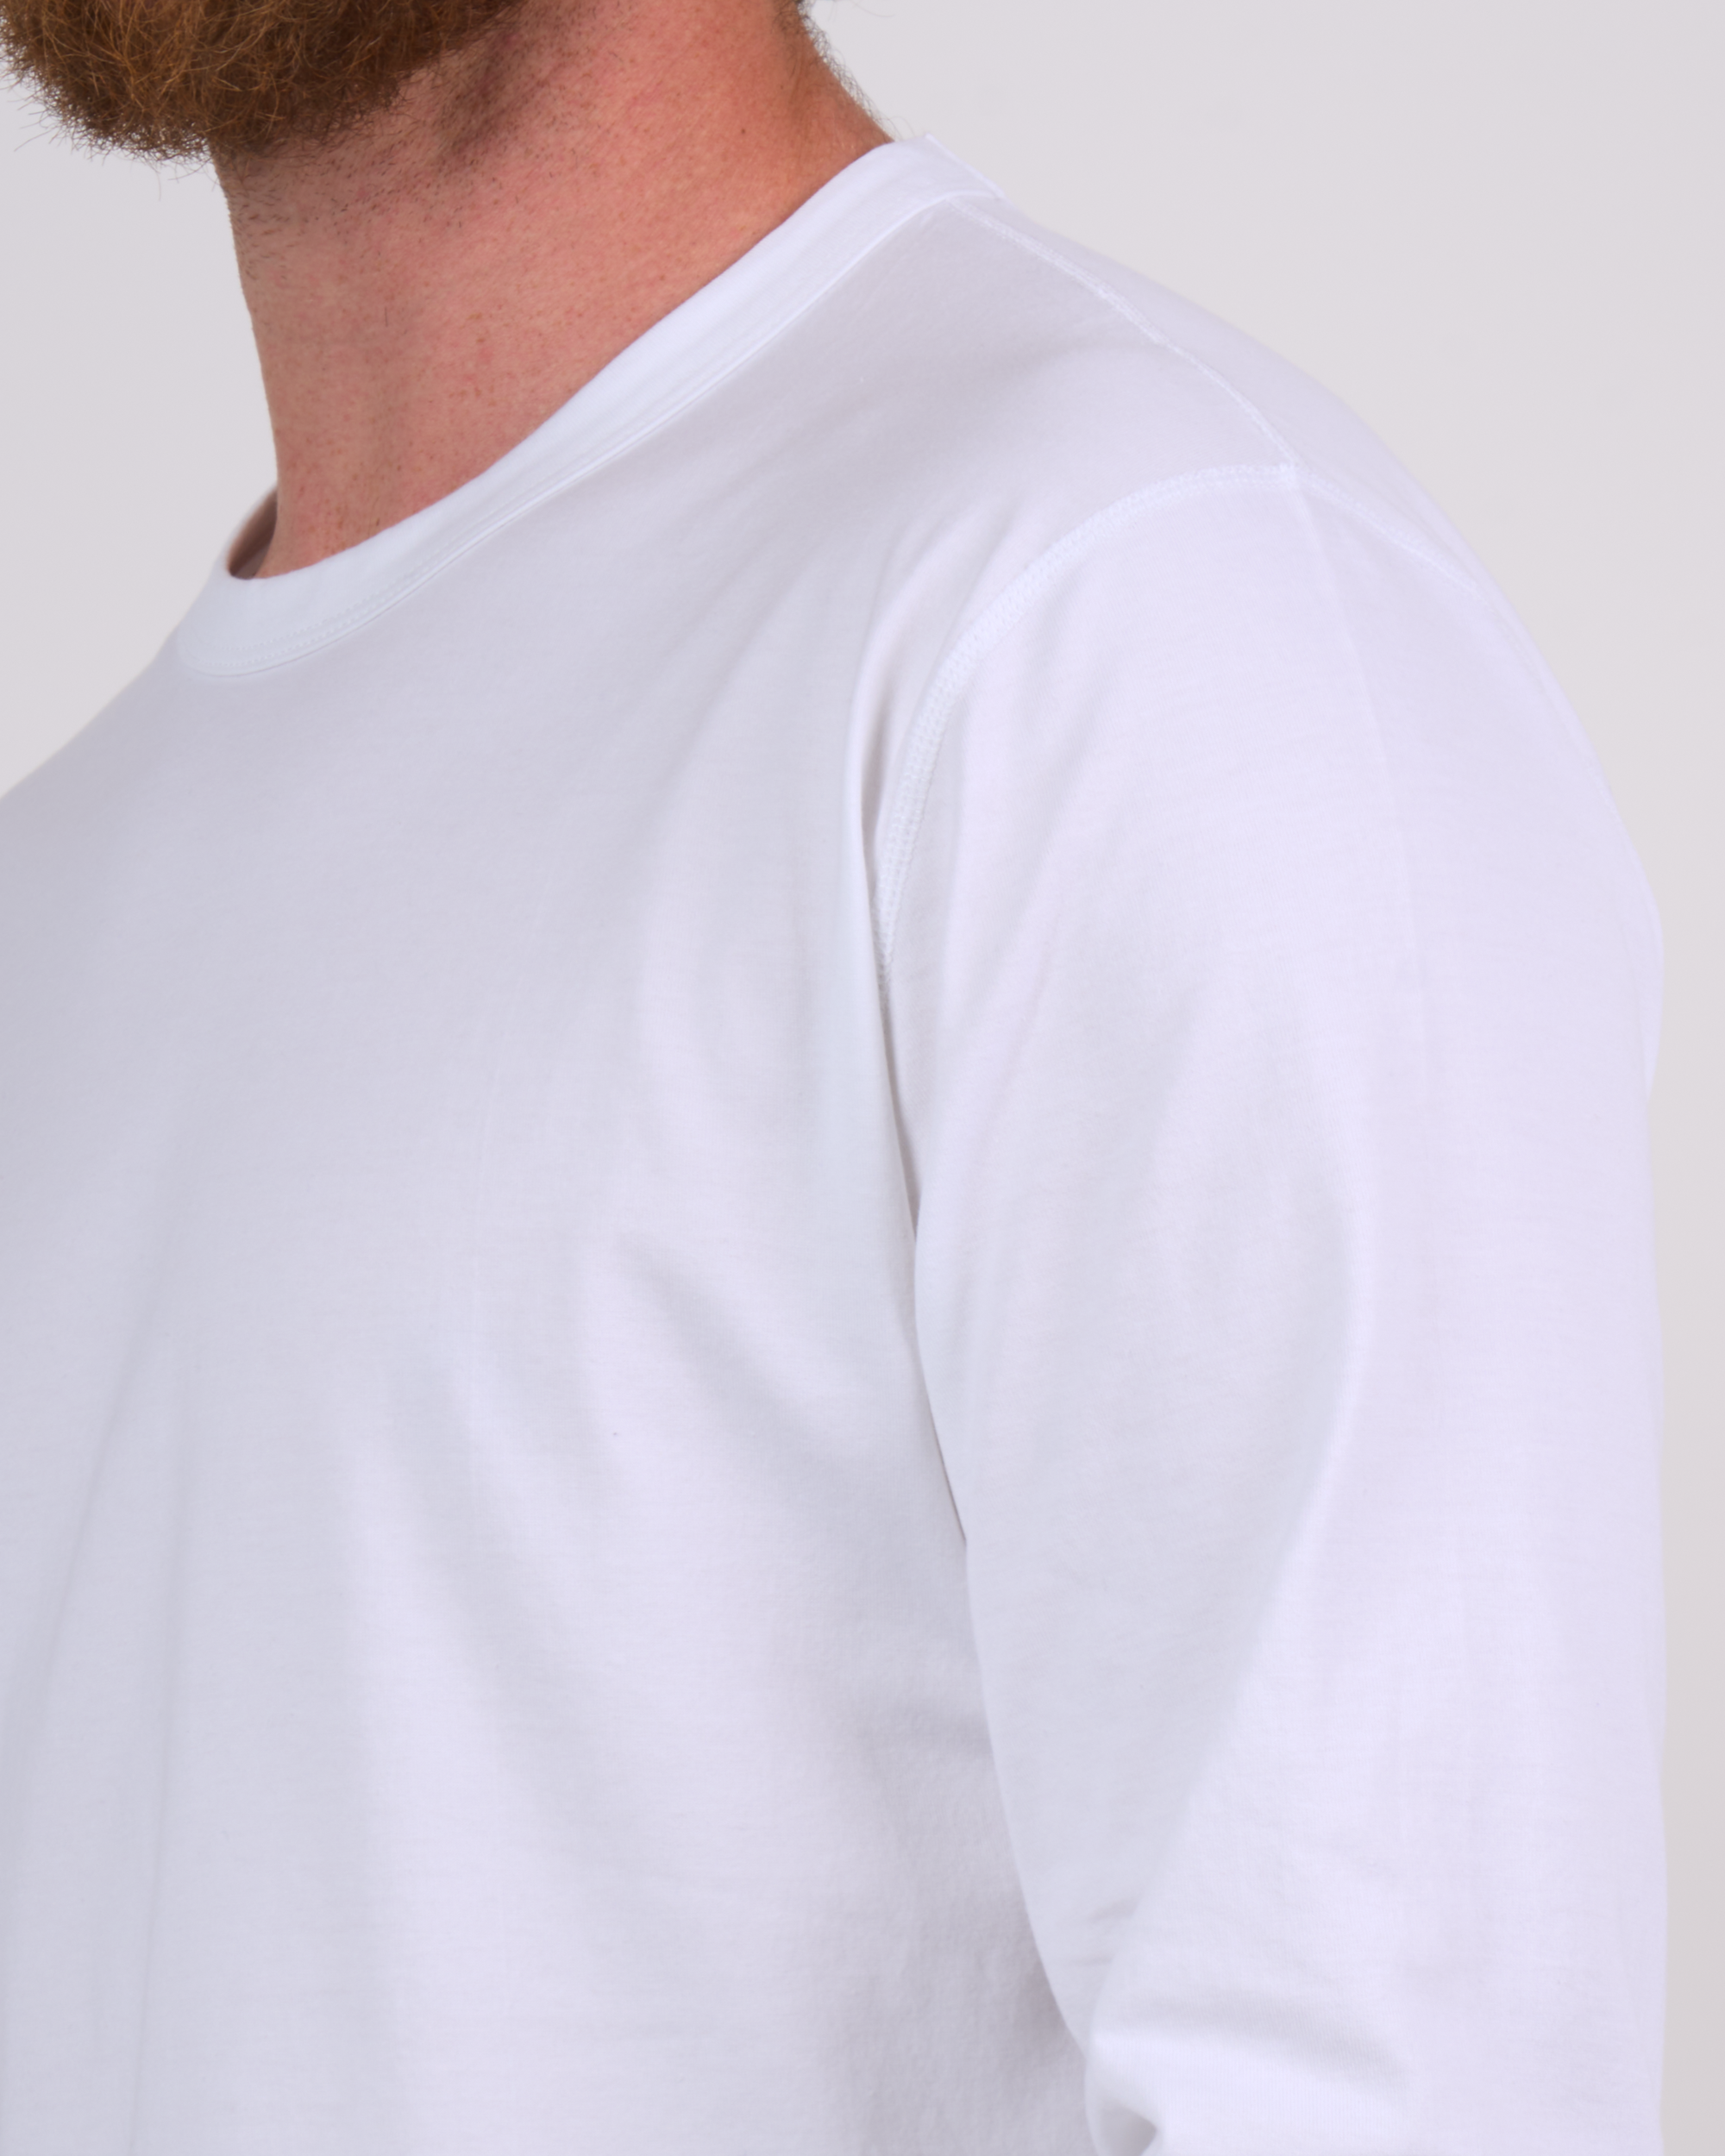 Foreign Rider Co Supima Cotton White Long Sleeve T-Shirt Shoulder Flat-lock Stitch Detail